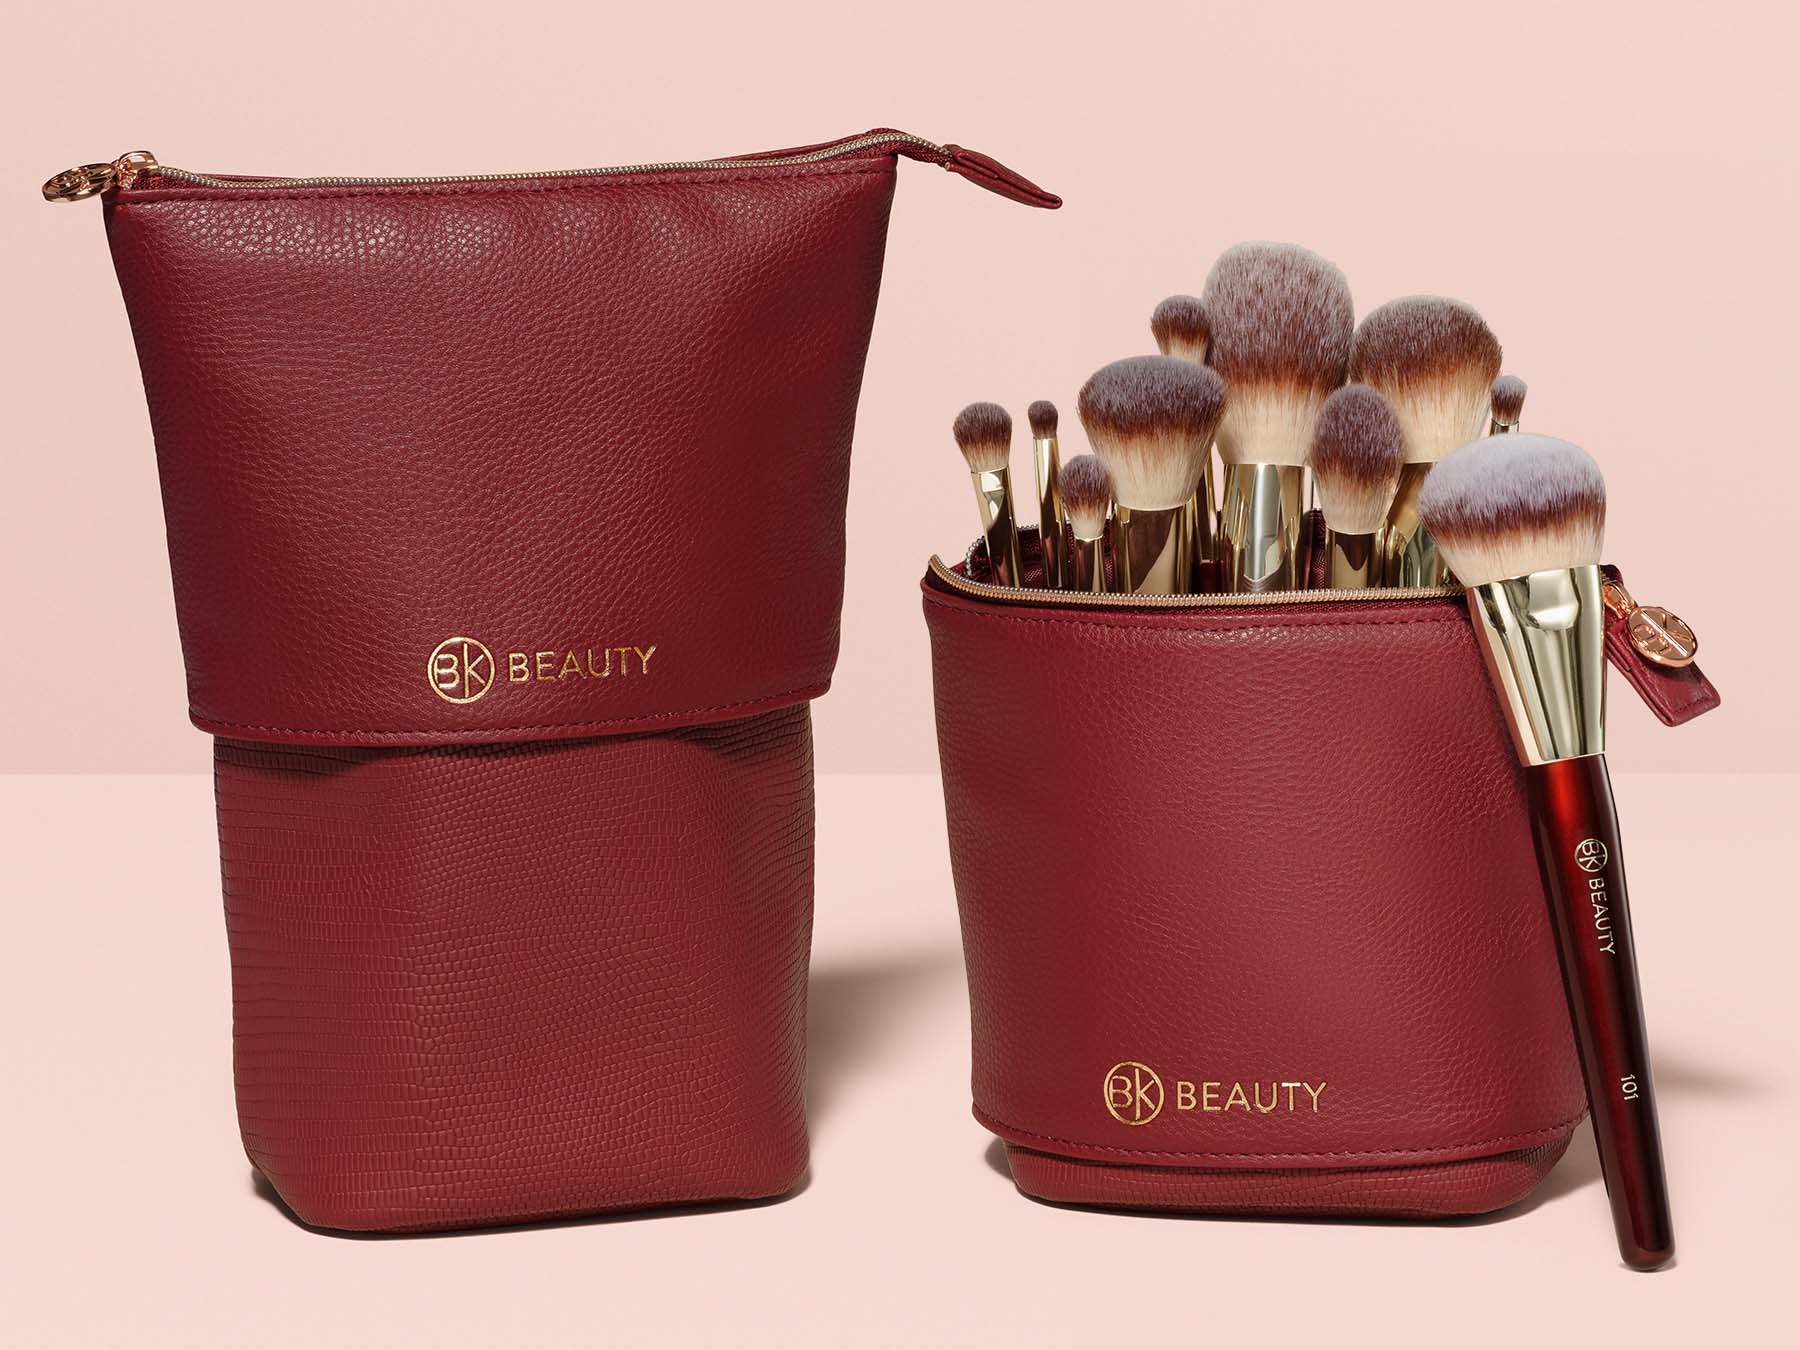 PalProt Makeup Brush Holder - Travel-Friendly and Large Capacity